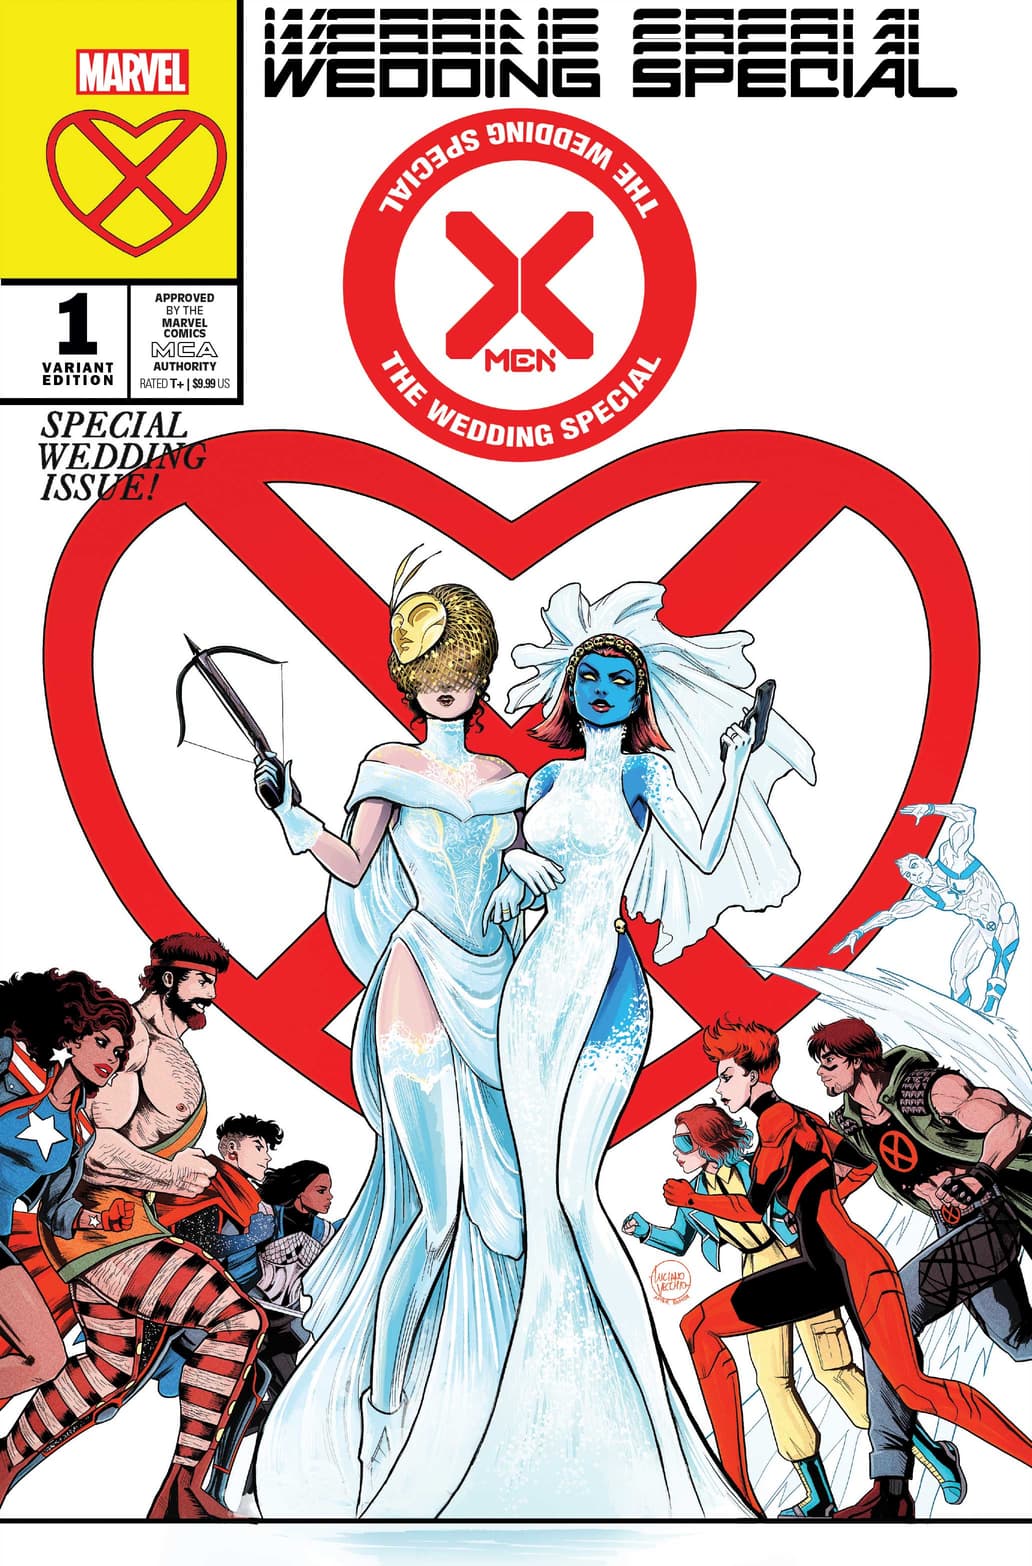 X-MEN: THE WEDDING SPECIAL #1 variant cover by Luciano Vecchio